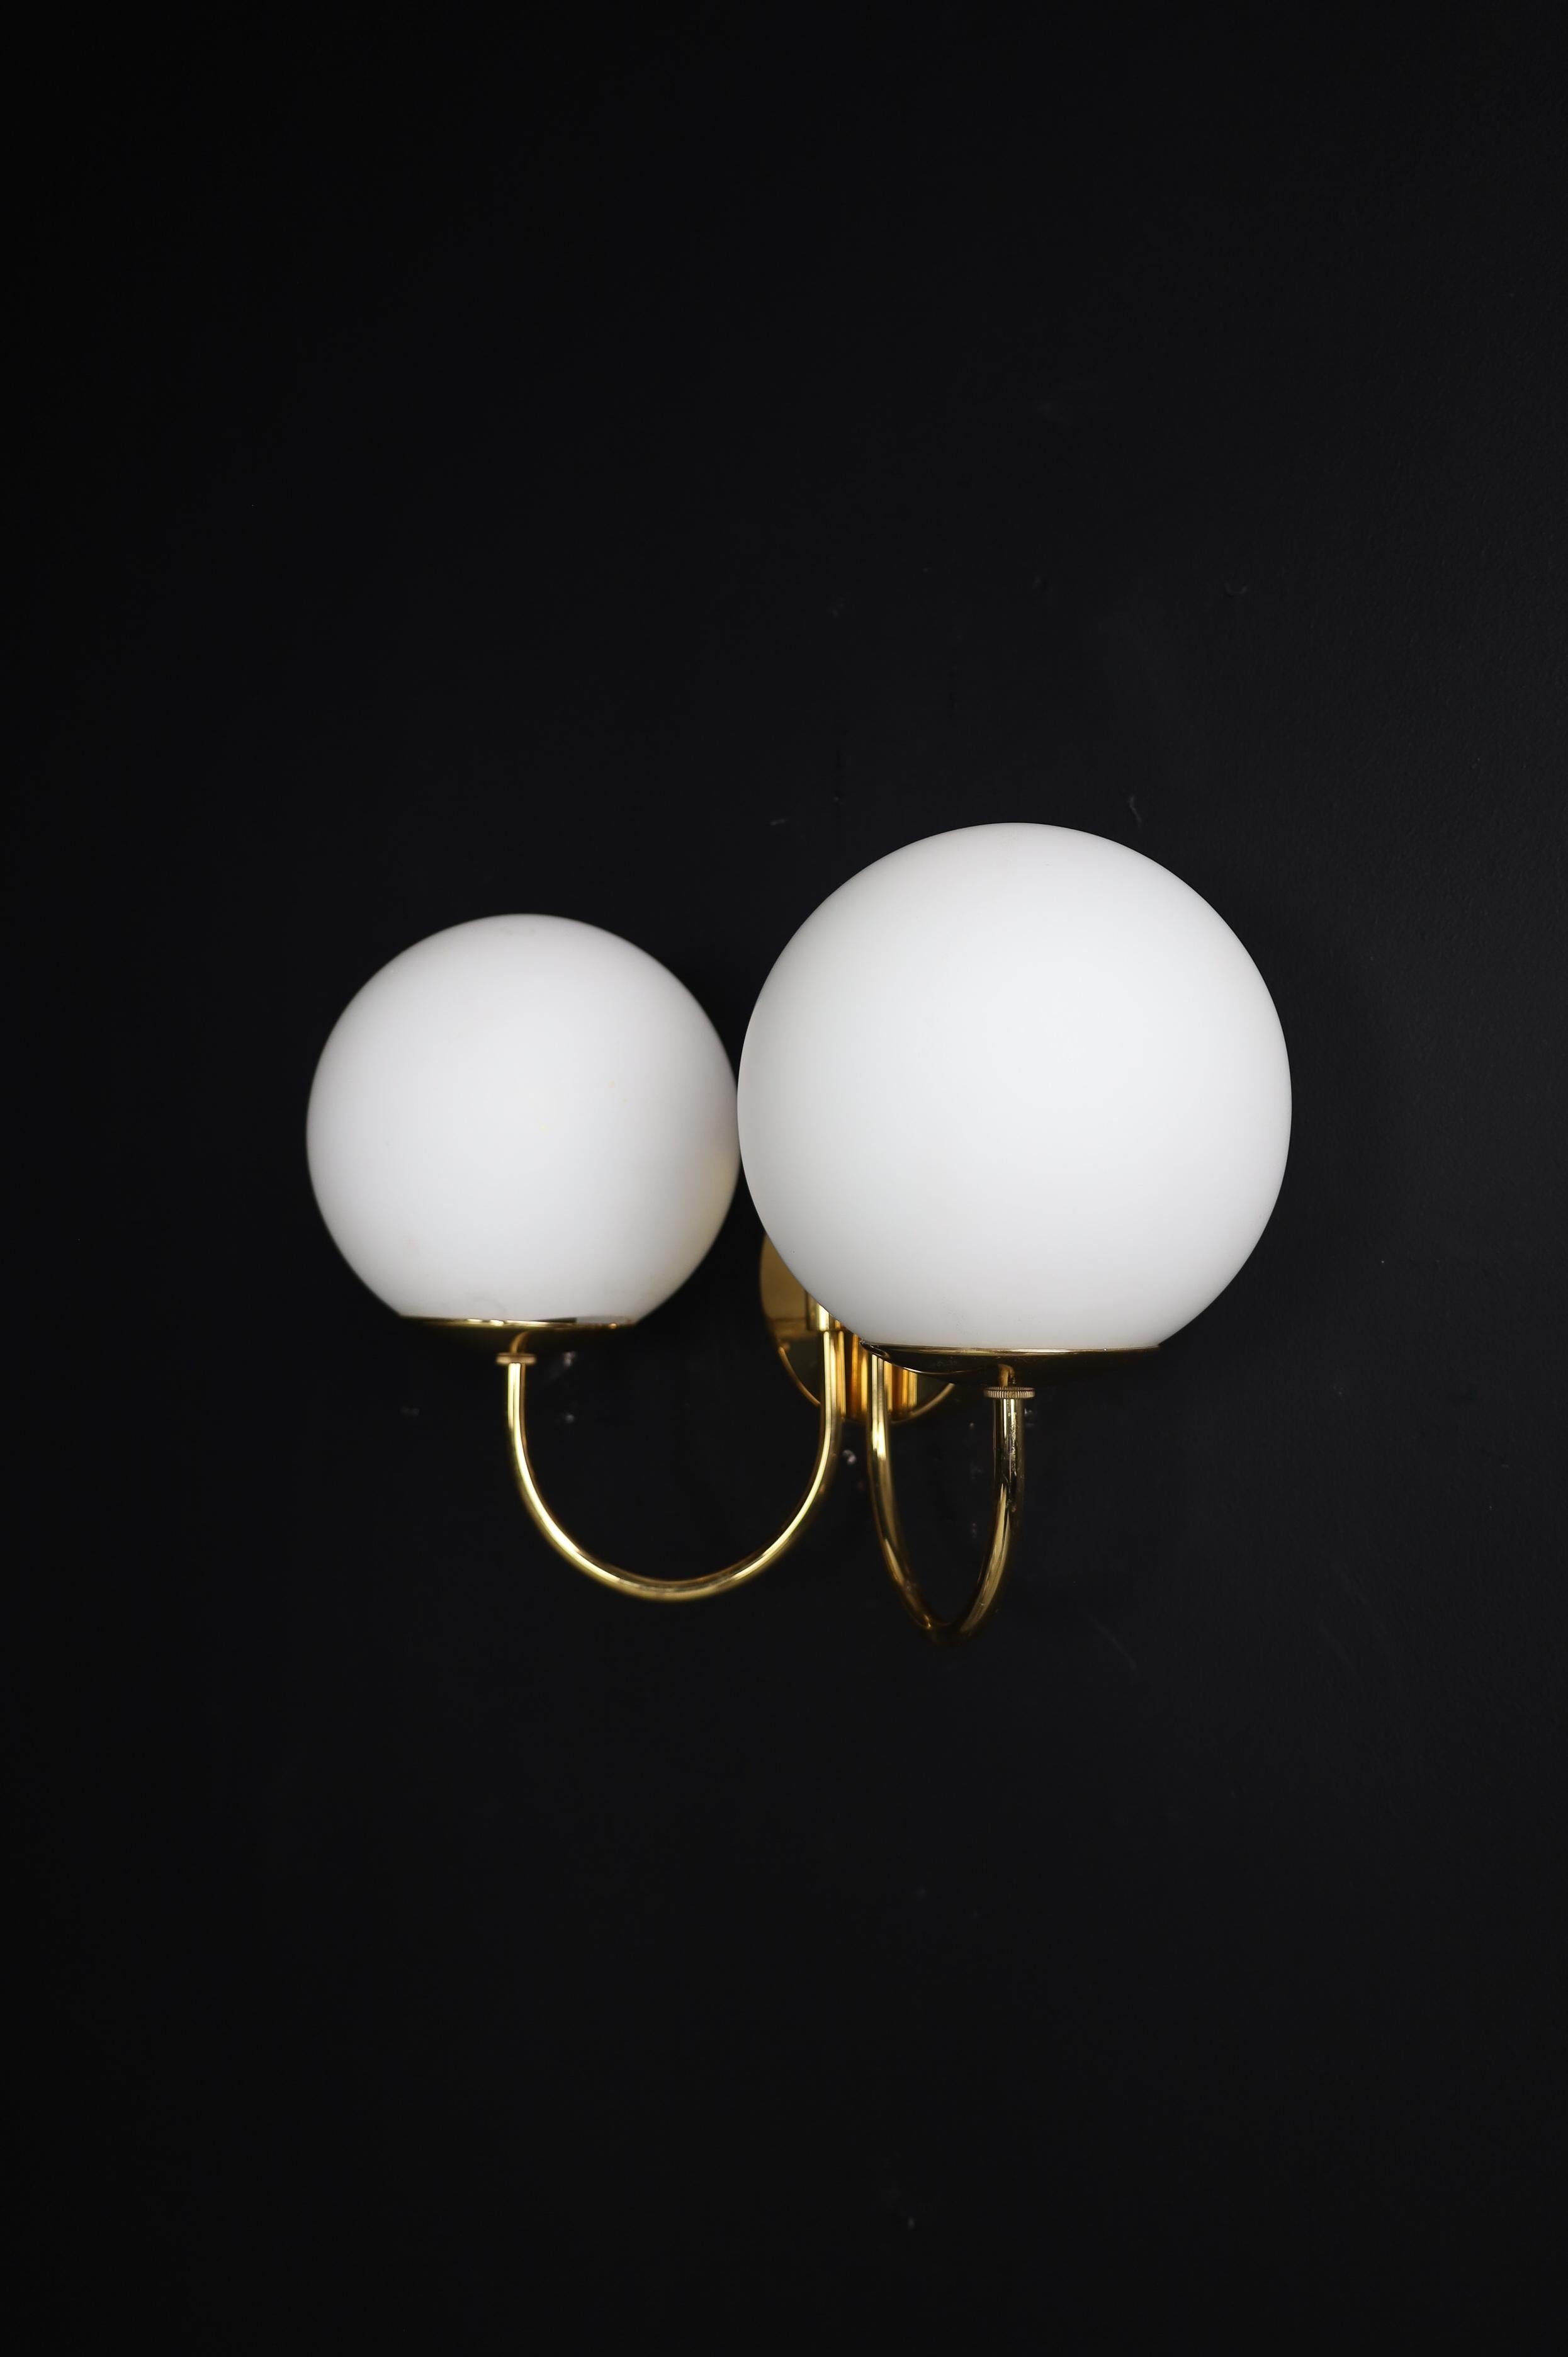 Mid-Century Modern Elegant Sconces with Brass Fixtures and Opaline Glass Globes, Italy, 1960s For Sale